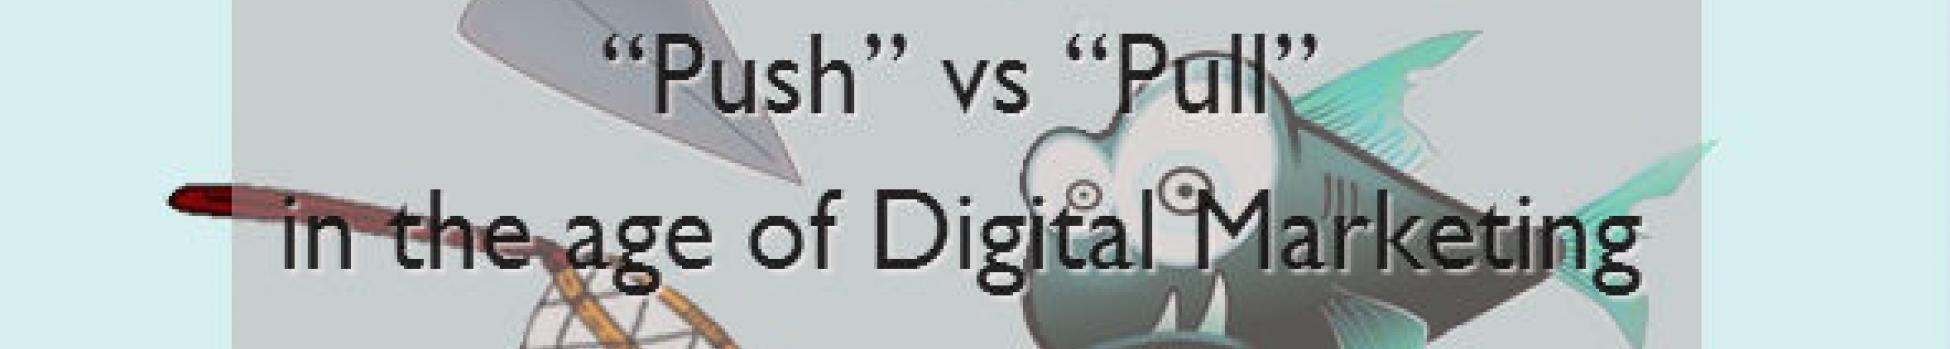 “Push” vs “Pull” in the age of Digital Marketing